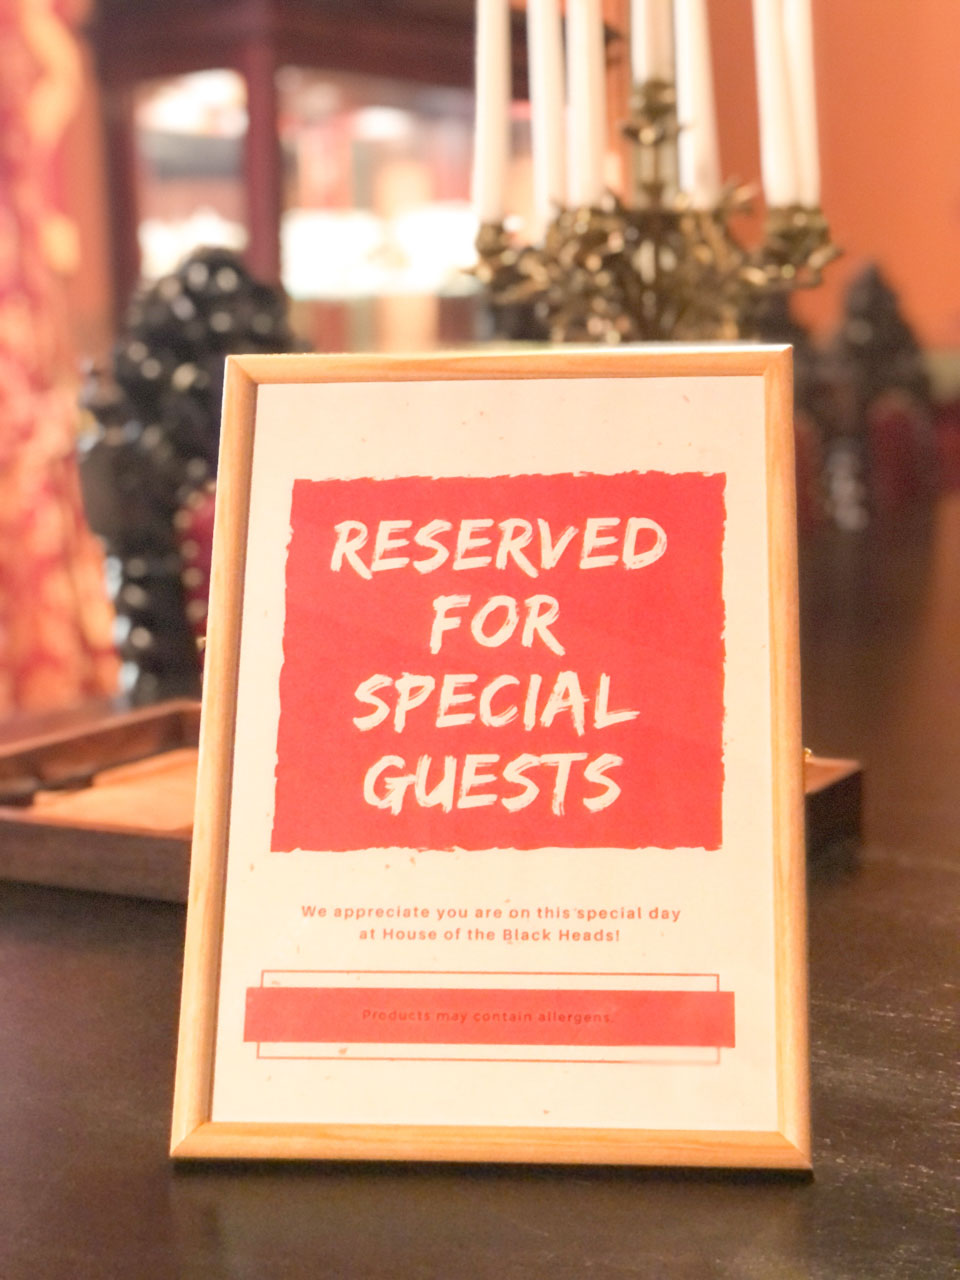 A framed sign that says "Reserved for special guests"